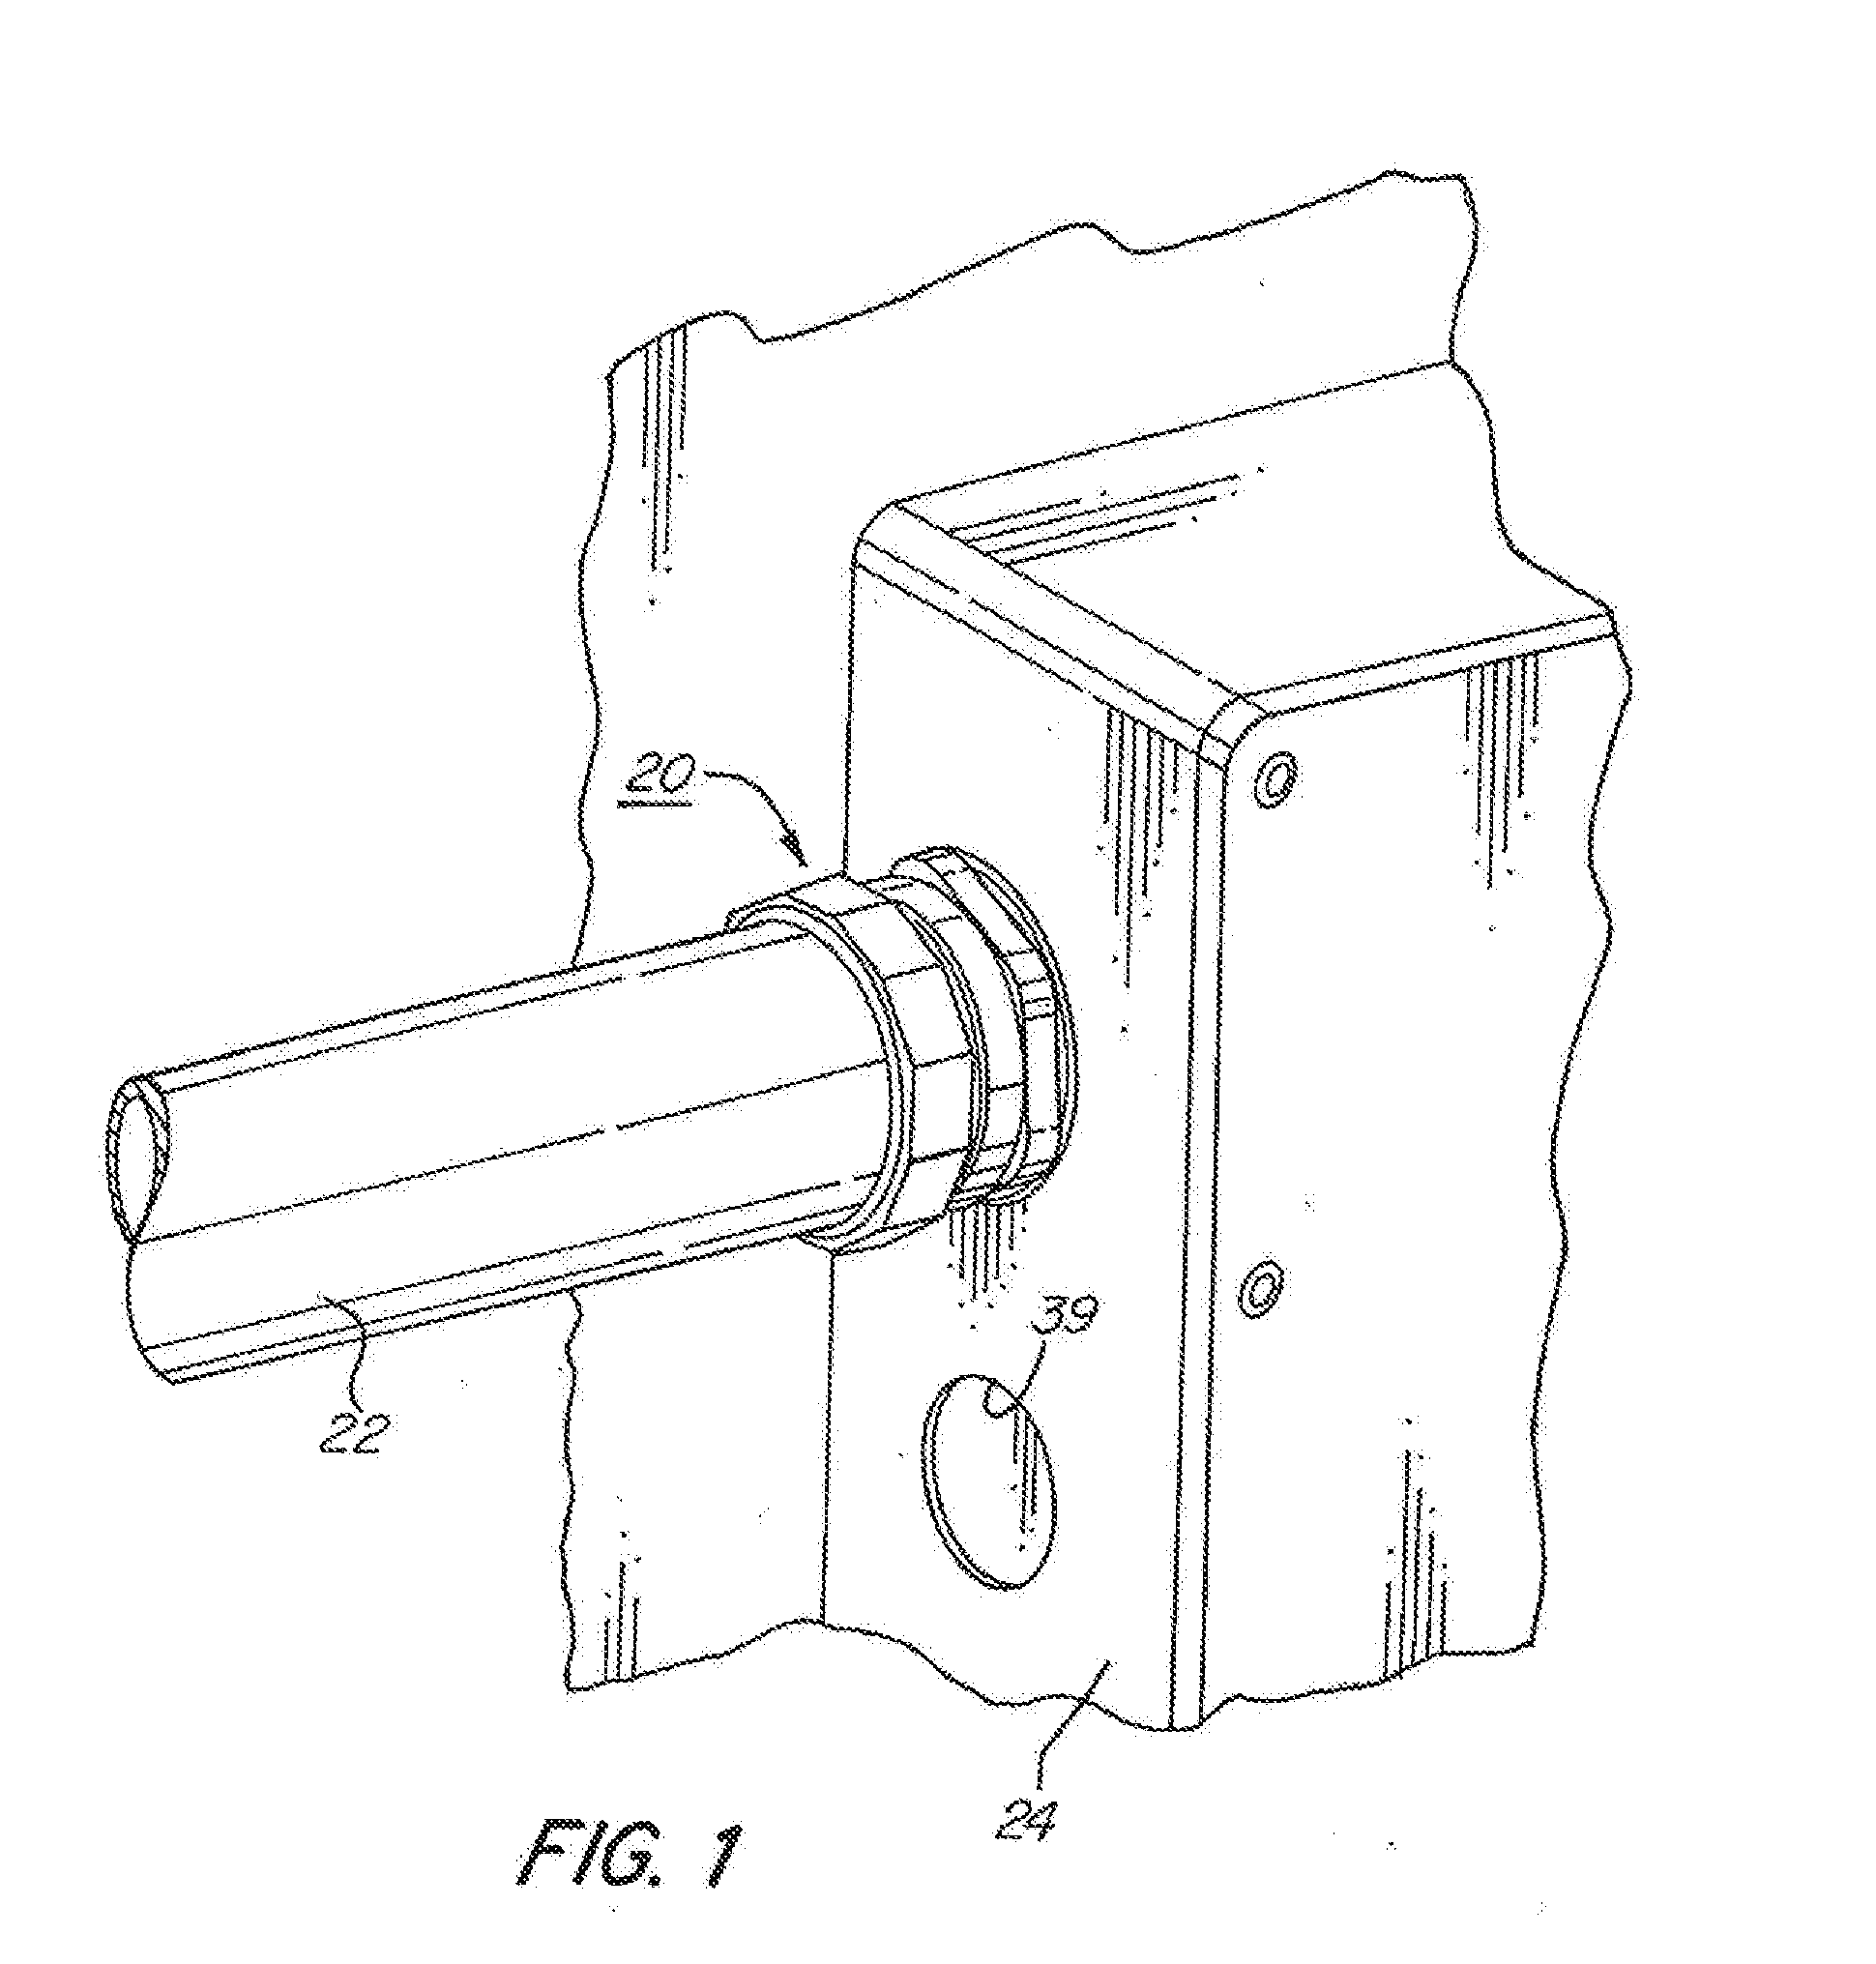 Co-molded sealing ring for use in an electrical fitting, and a raintight compression connector and raintight compression coupler incorporating a co-molded sealing ring